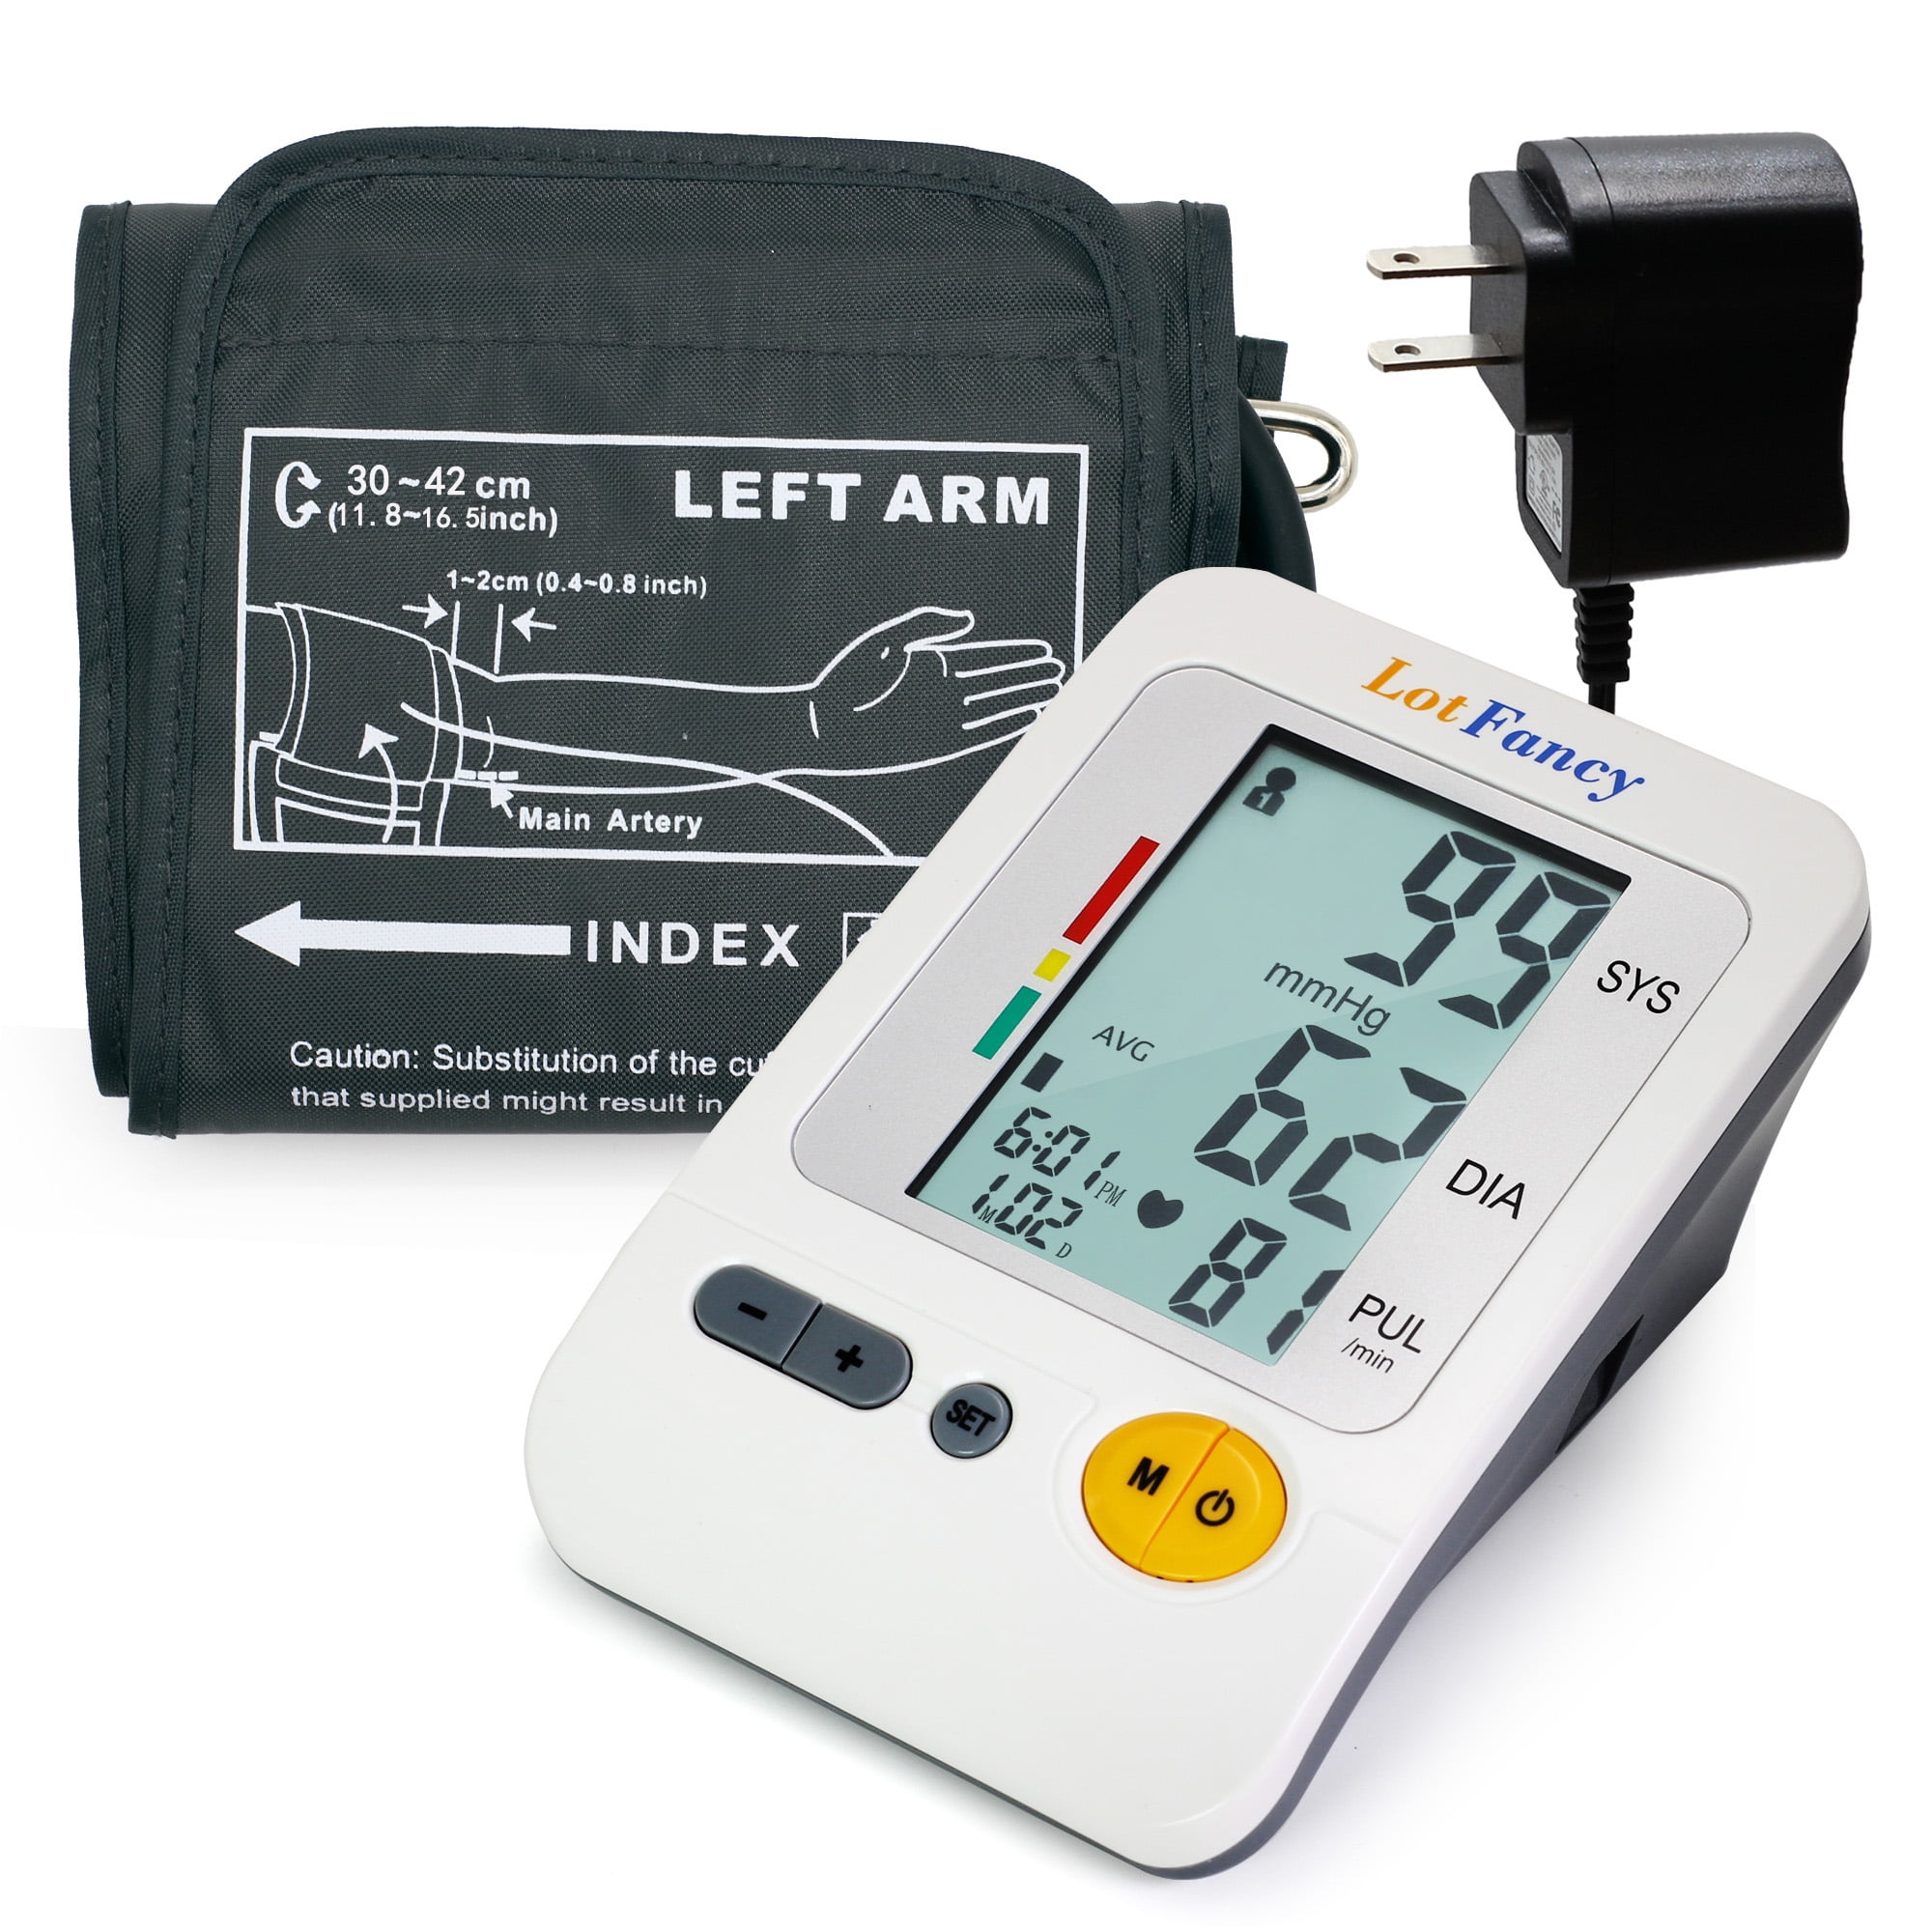 Wrist Blood Pressure Monitor, Tovendor Automatic BP Monitor with